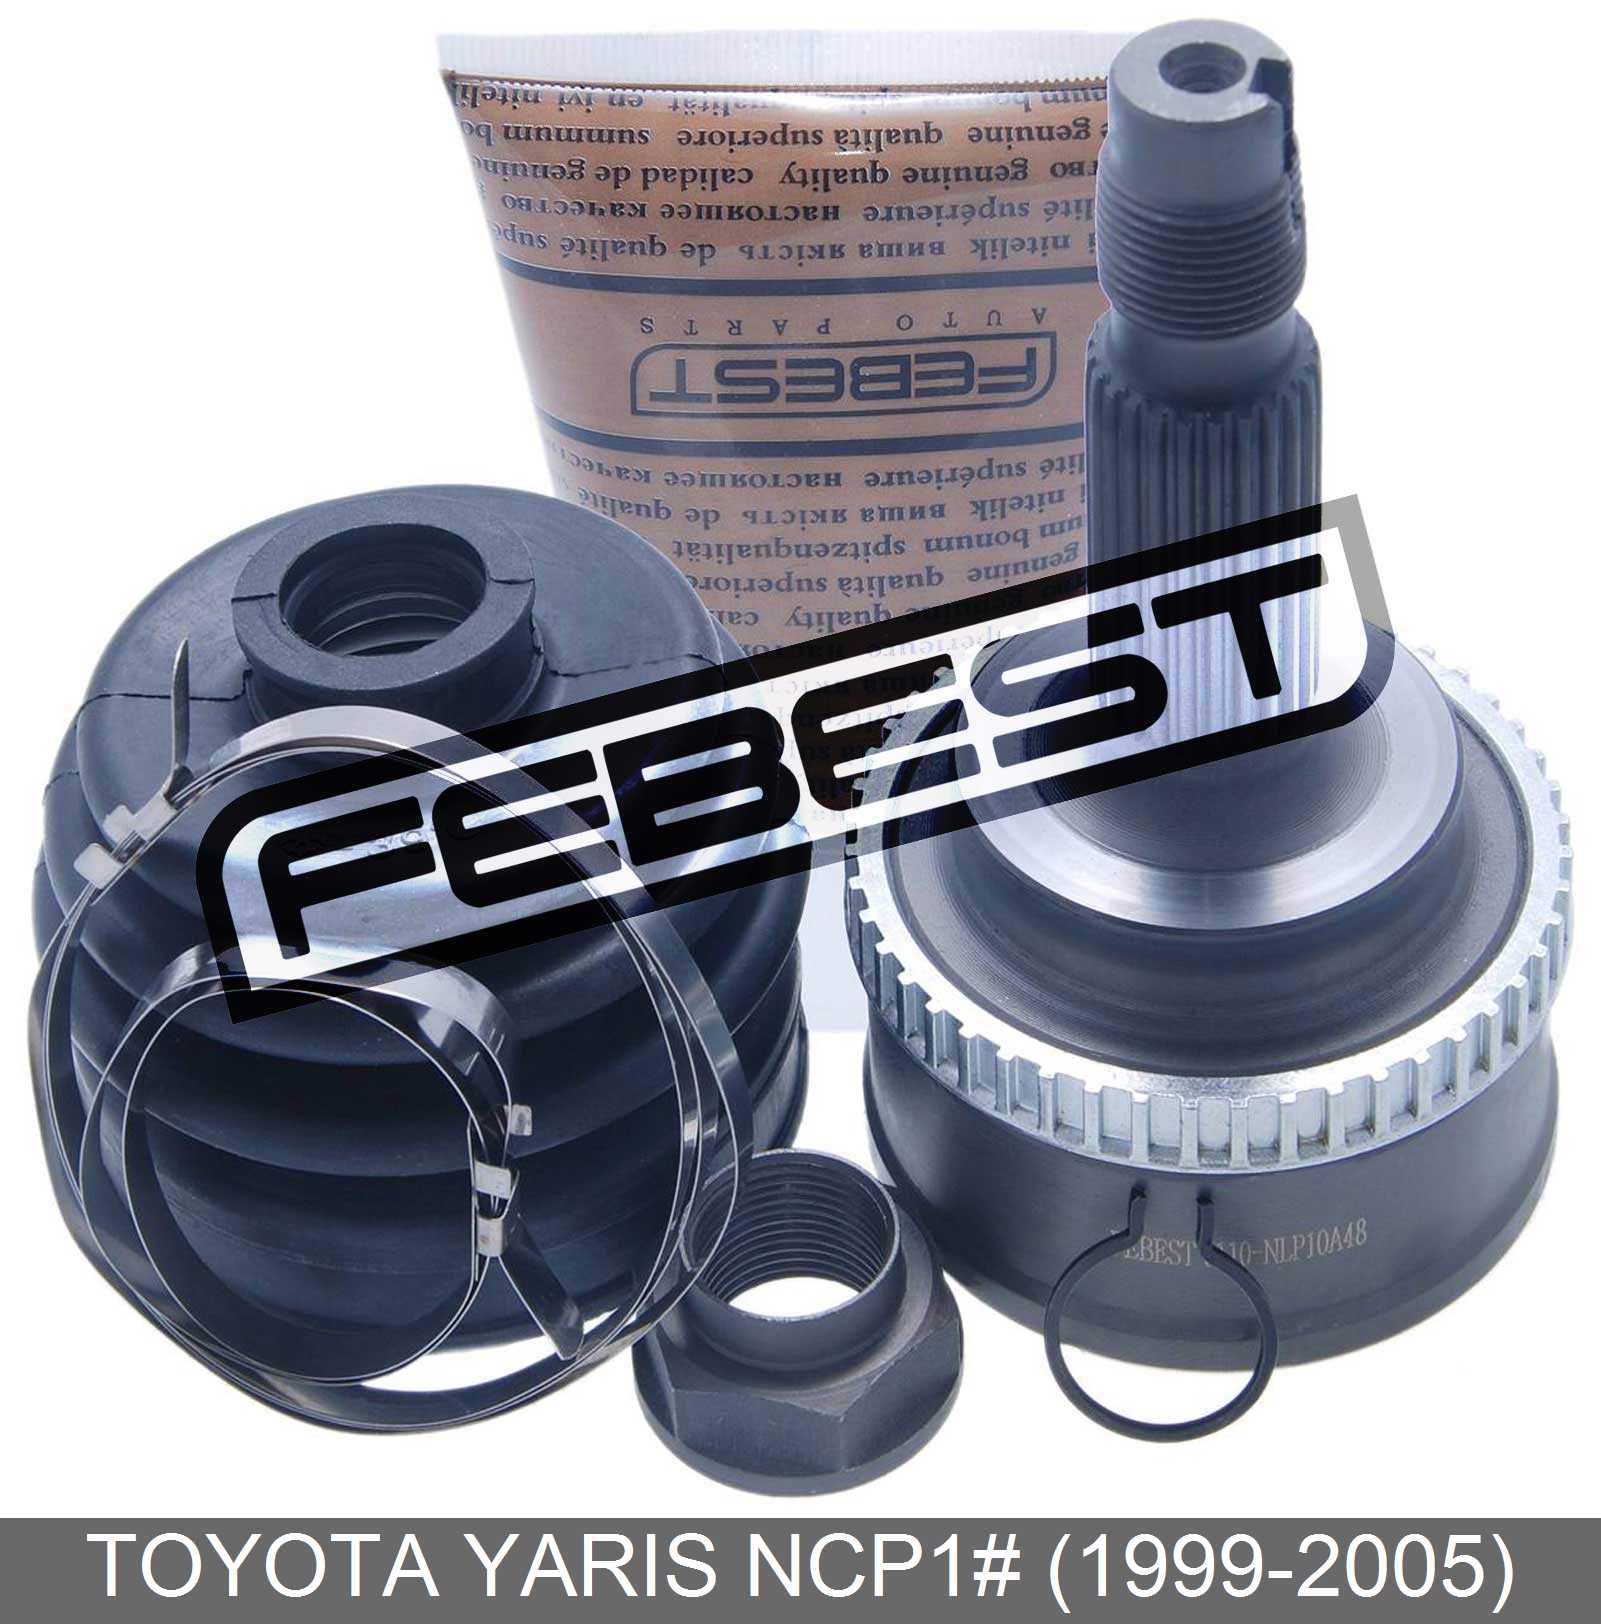 TOYOTA 0110-NLP10A48_TN Product Photo